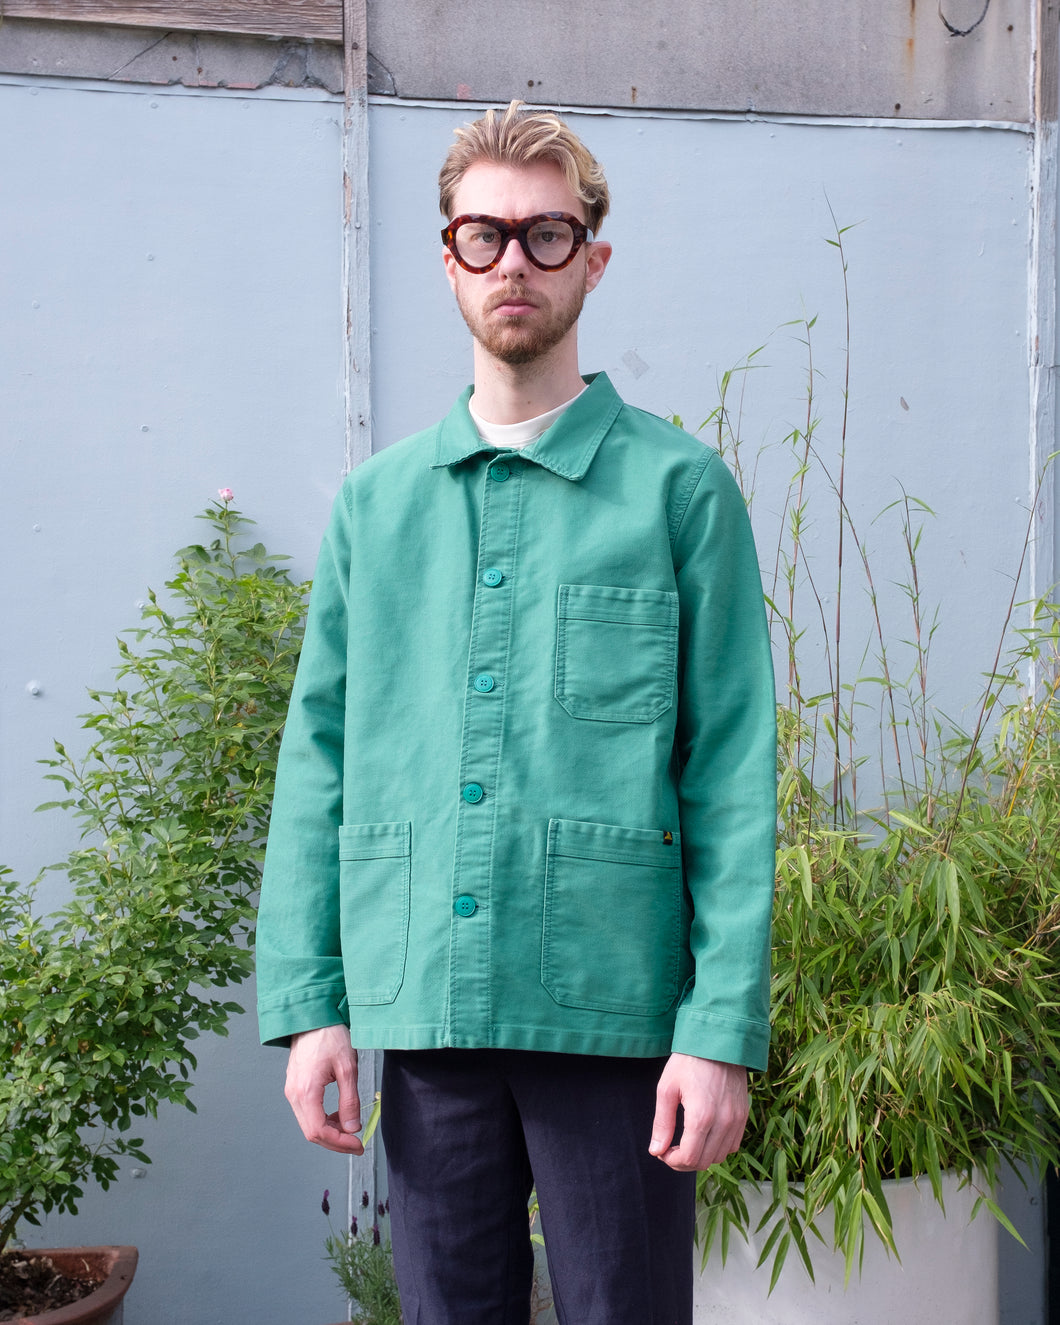 Le mont st michel - Genuine Work Jacket (Men's) - Green Twill - front. This image depicts the model wearing the genuine work jacket in a refreshing cold tone vibrant green with color matched buttons. it has 3 pockets, one located at the left chest and two at the waist. 